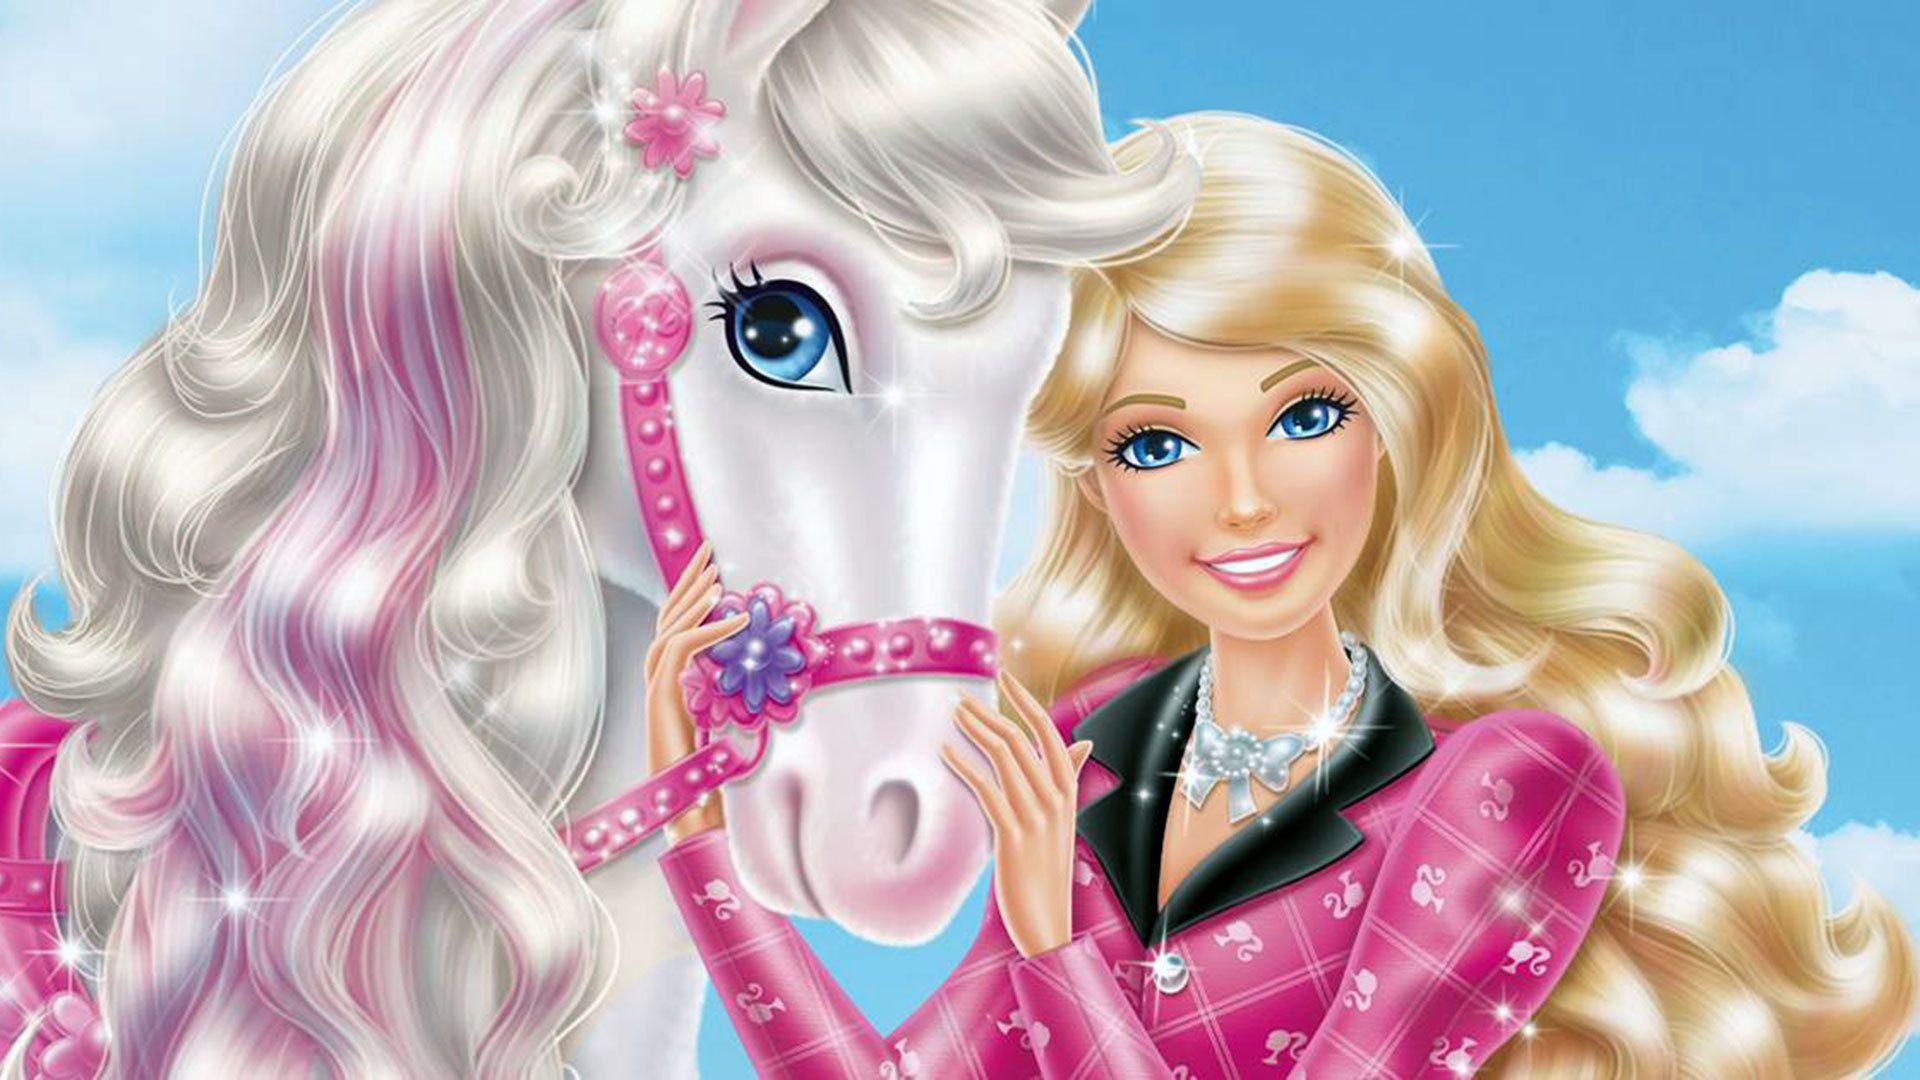 Barbie And Her Sisters In A Pony Tale image Barbie In A Pony Tale